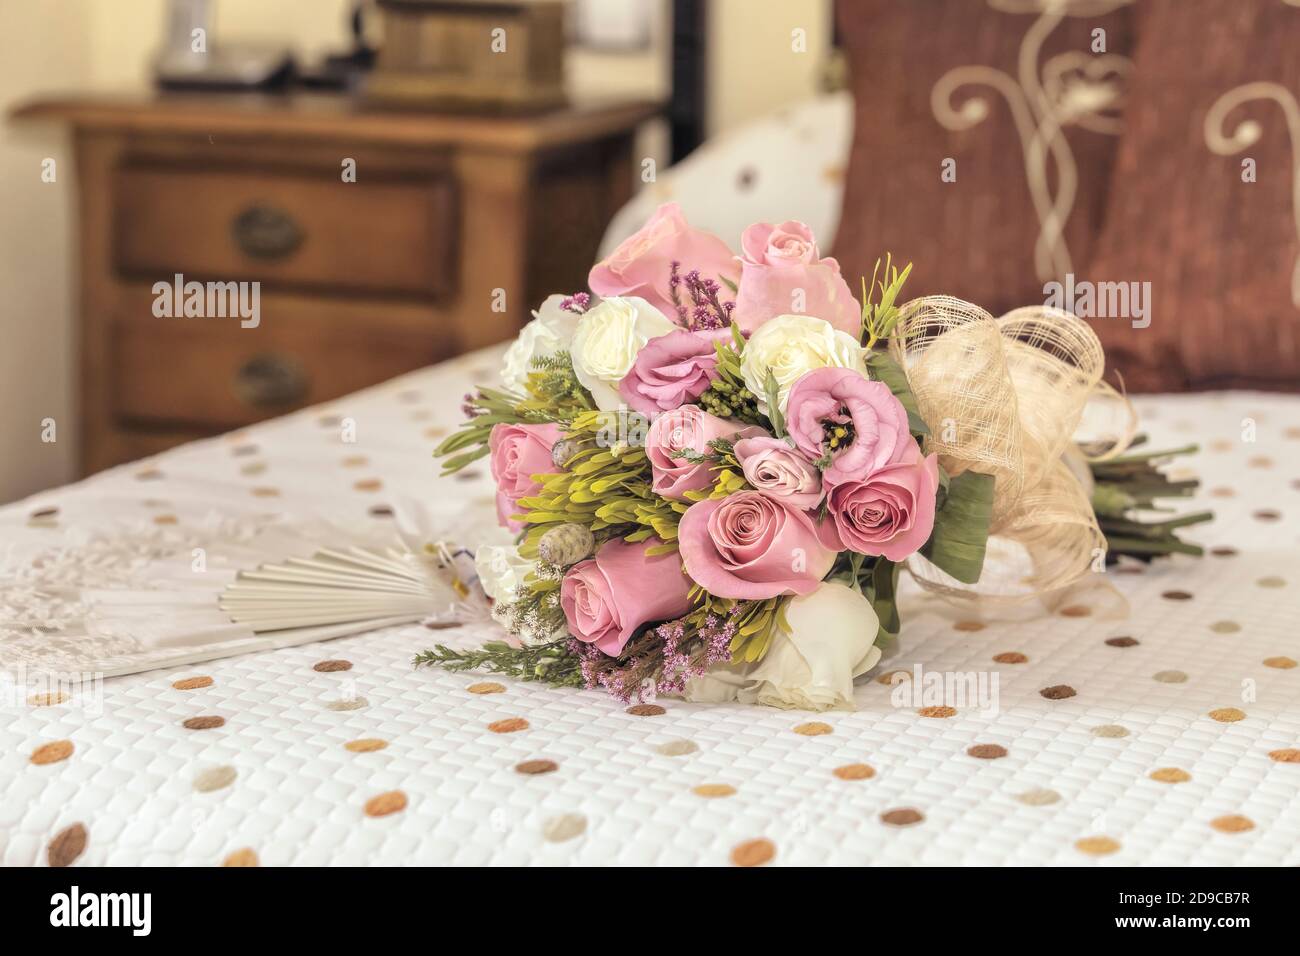 Bridal bouquet of roses on a bed of a blurred bedroom Stock Photo